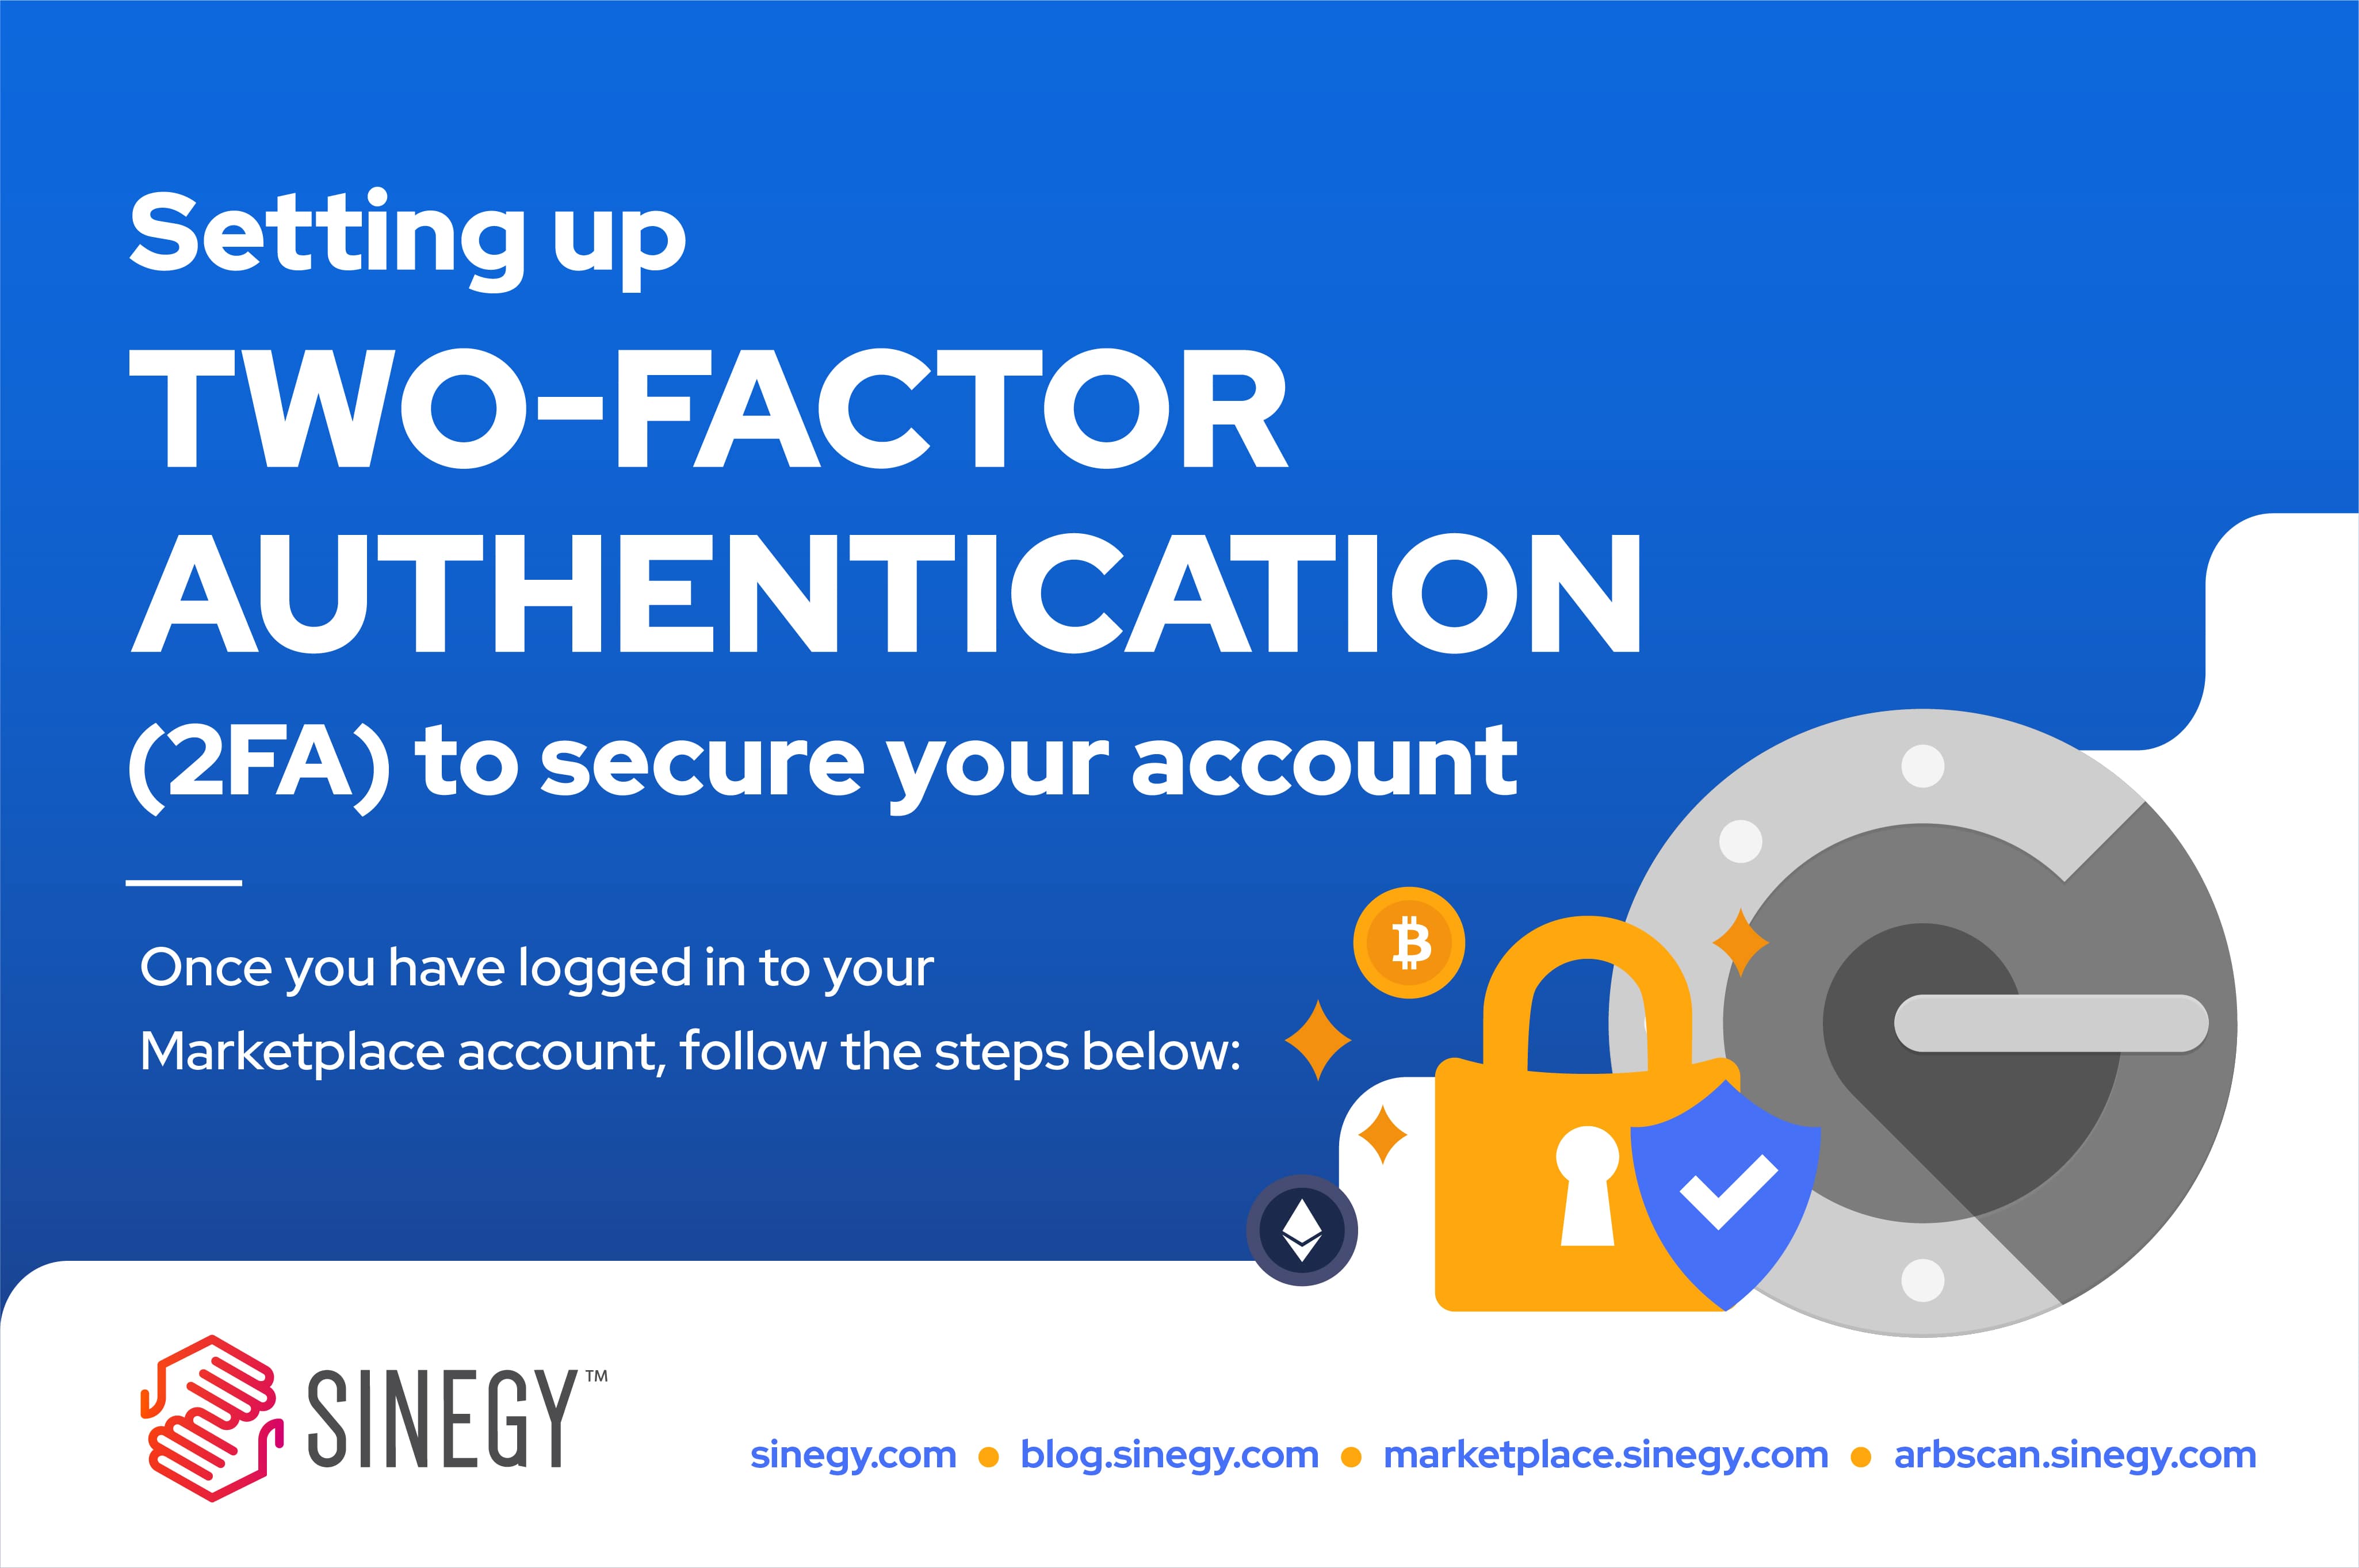 Copy_of_Setting-up-2FA-to-secure-your-account-01.jpg